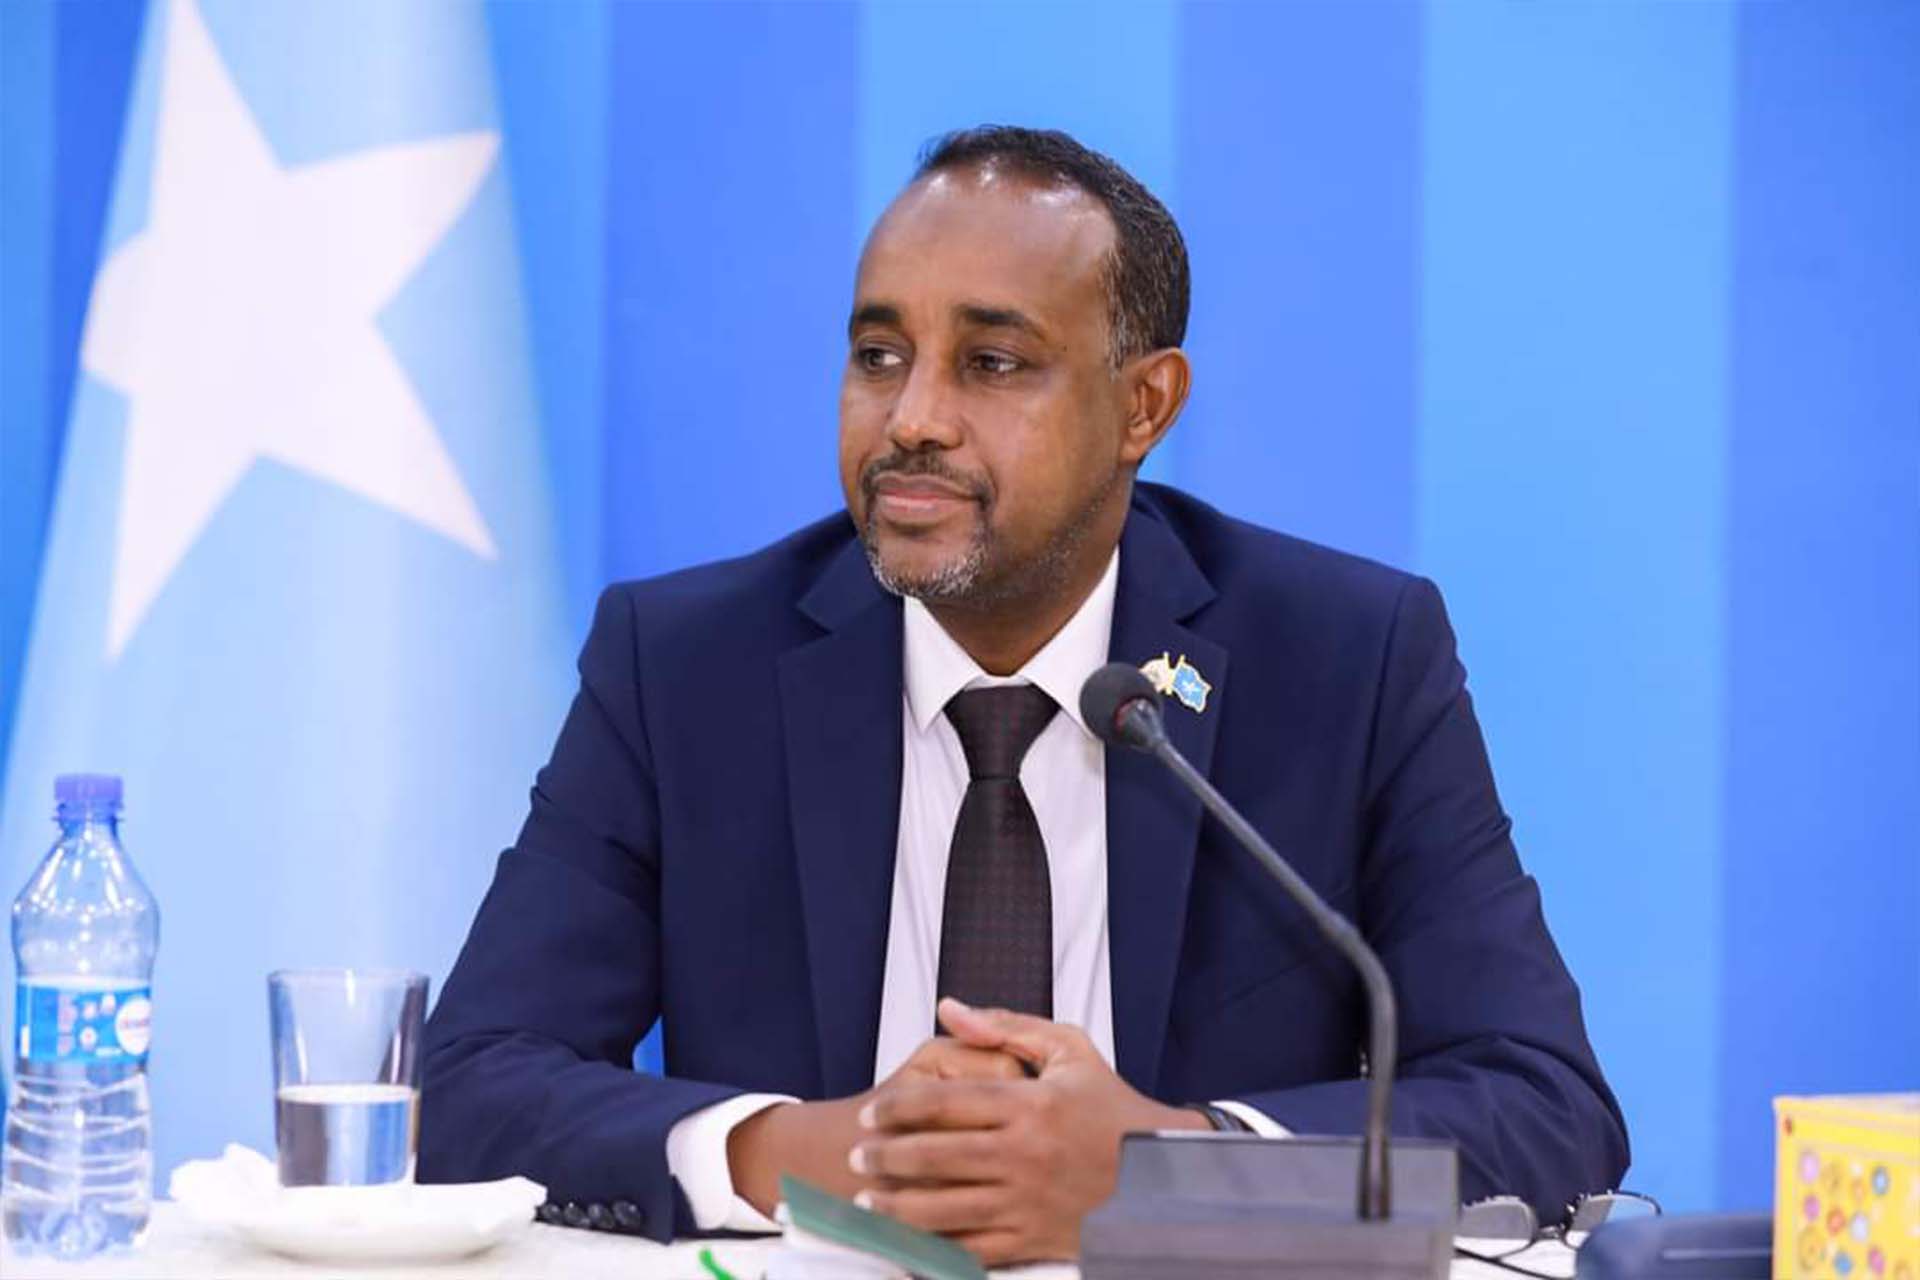 IGAD CONGRATULATES H.E. ENG. MOHAMED HUSSEIN ROBLE ON HIS APPOINTMENT AS THE NEW PRIME MINISTER OF SOMALIA